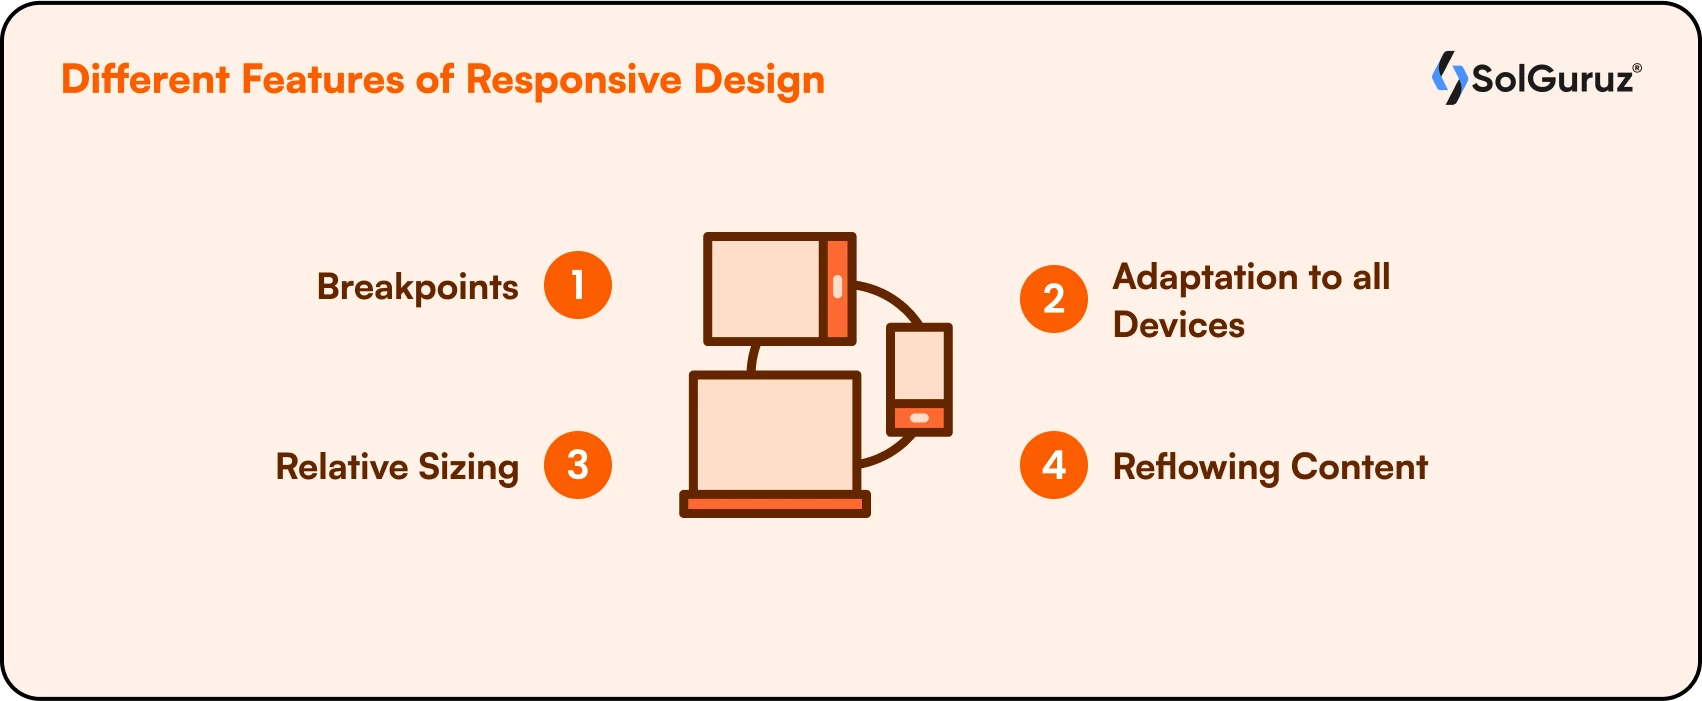 Different Features of Responsive Design